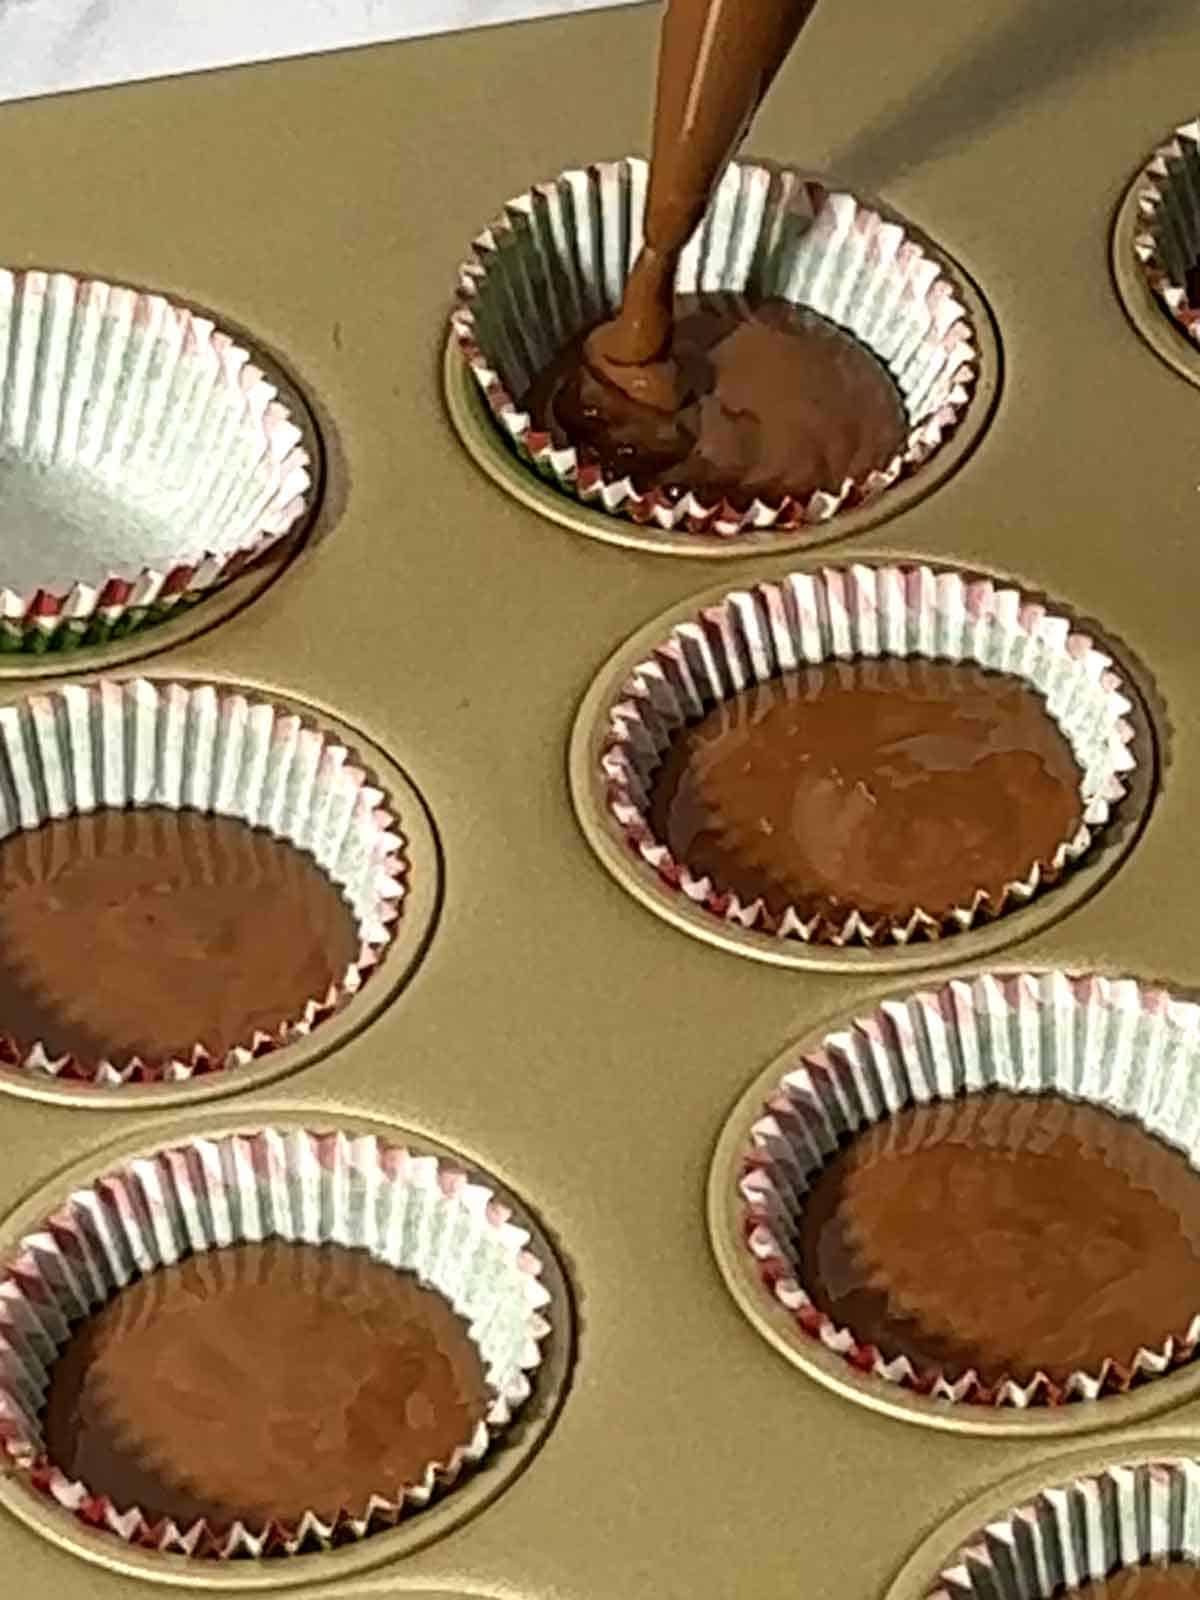 Piping the chocolate peanut butter mixture into the cups of my mini muffin pan.